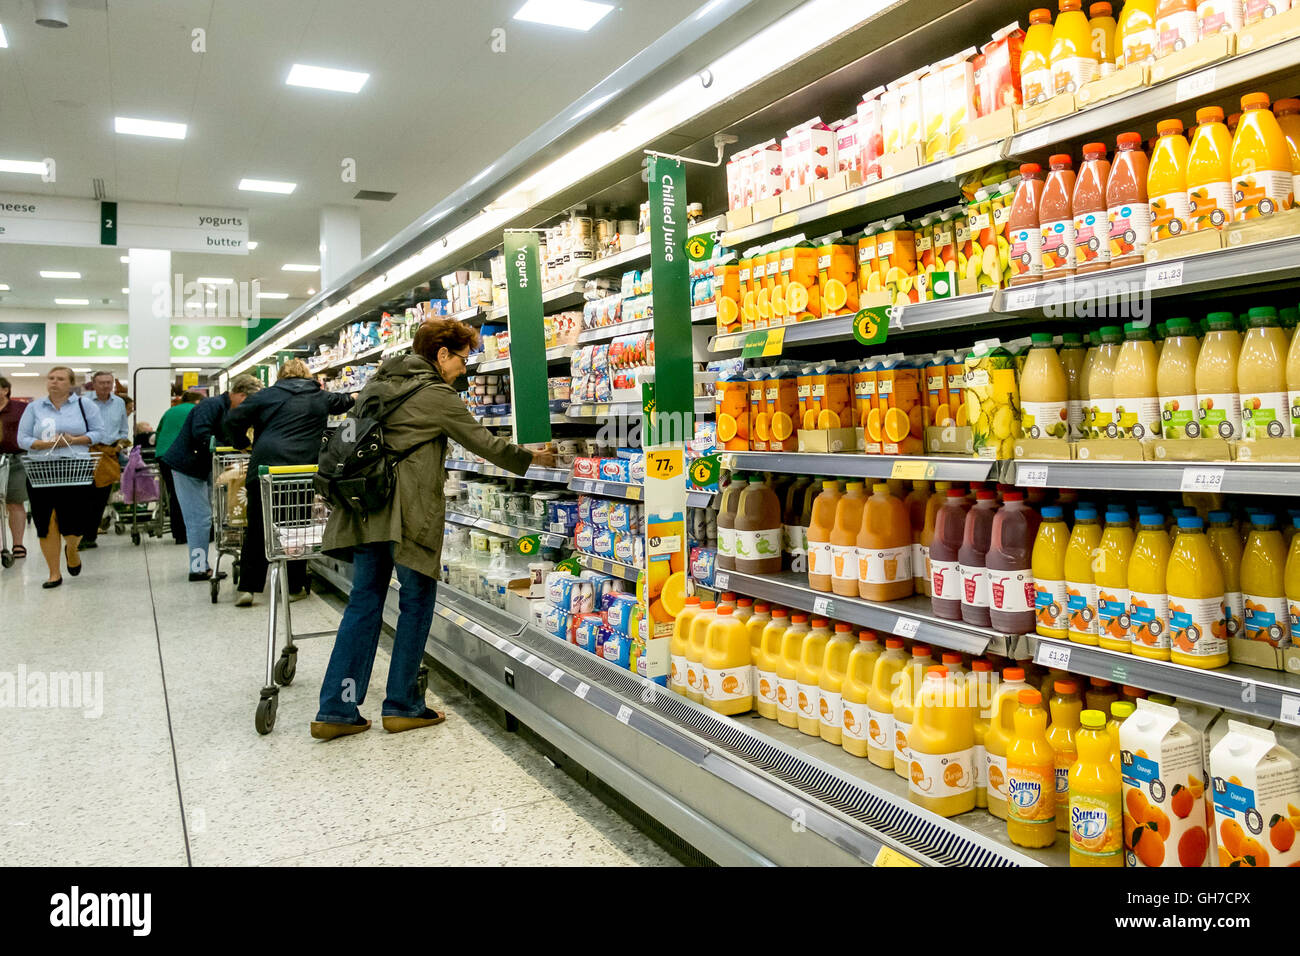 Customers shopping in a Morrisons supermarket. Stock Photo